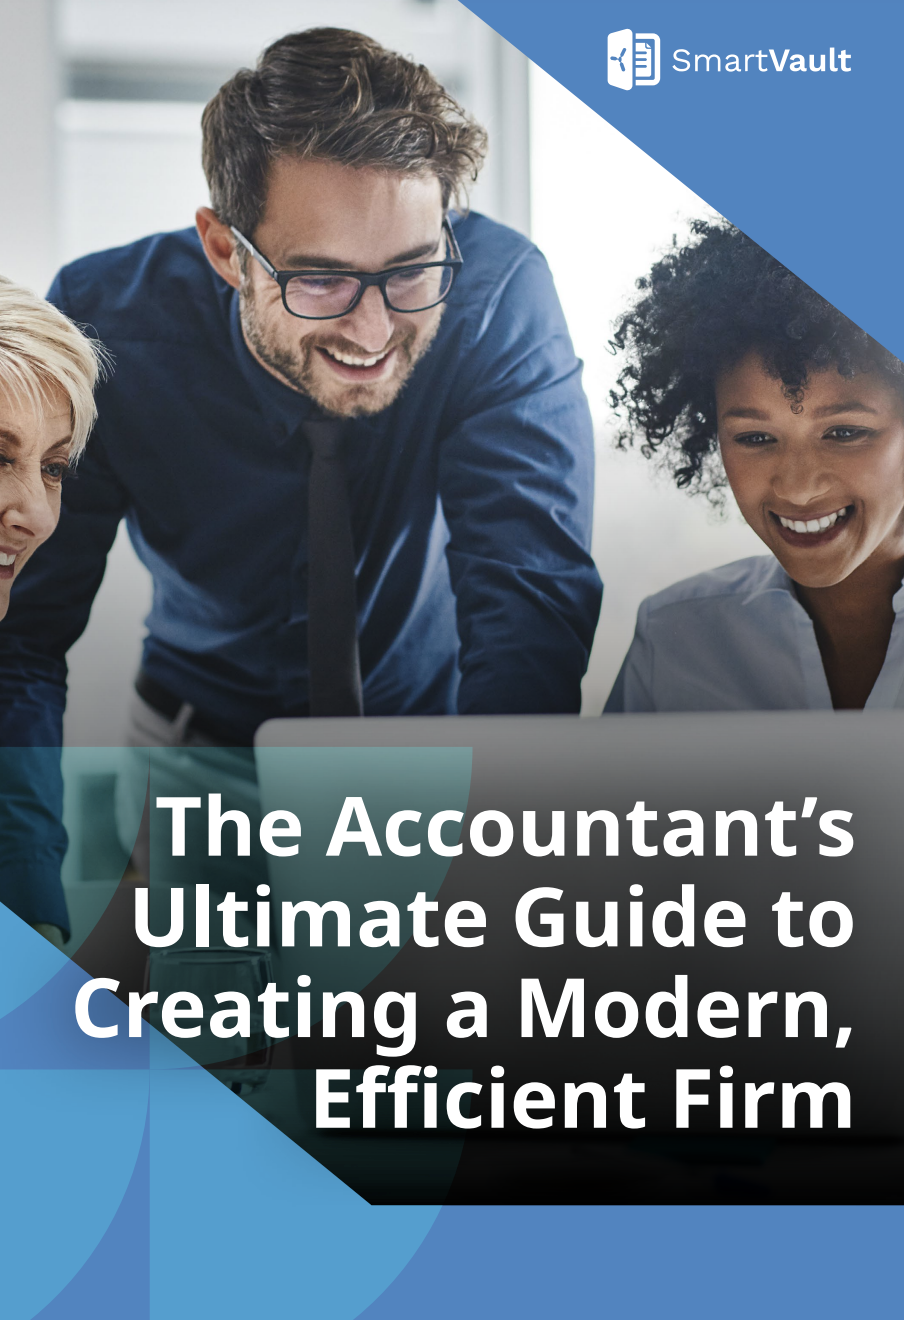 The Accountant's Ultimate Guide to Creating a Modern, Efficient Firm